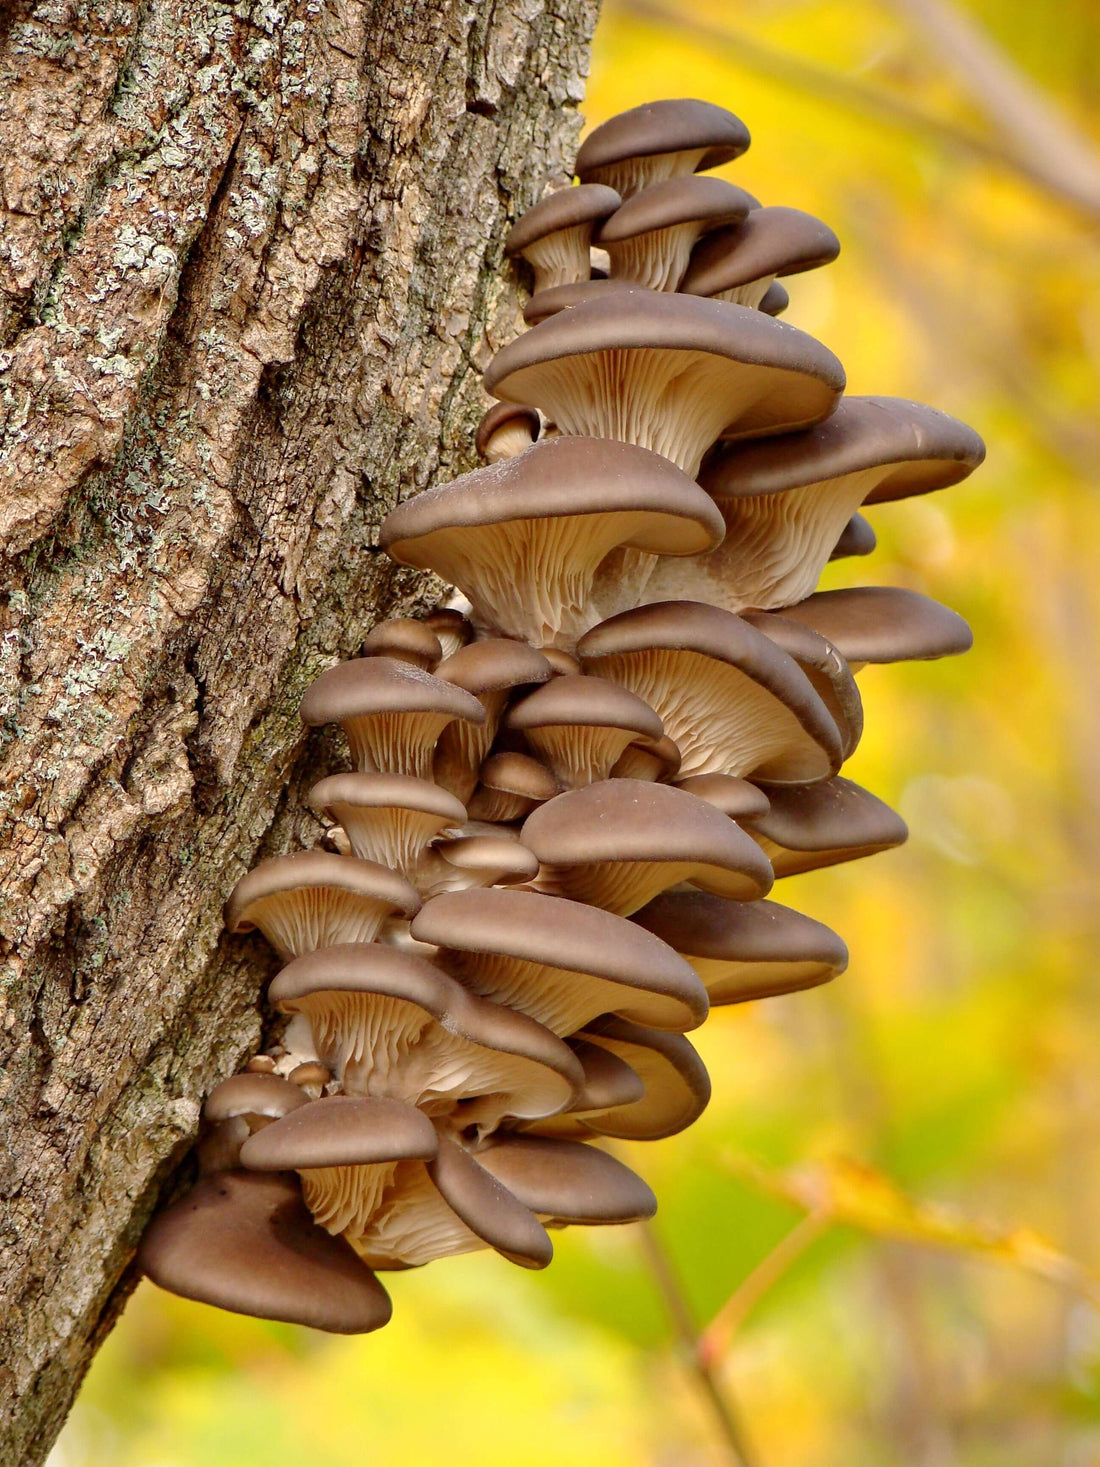 The Wonders of Mushrooms: A Beginner's Guide to These Amazing Plant Foods